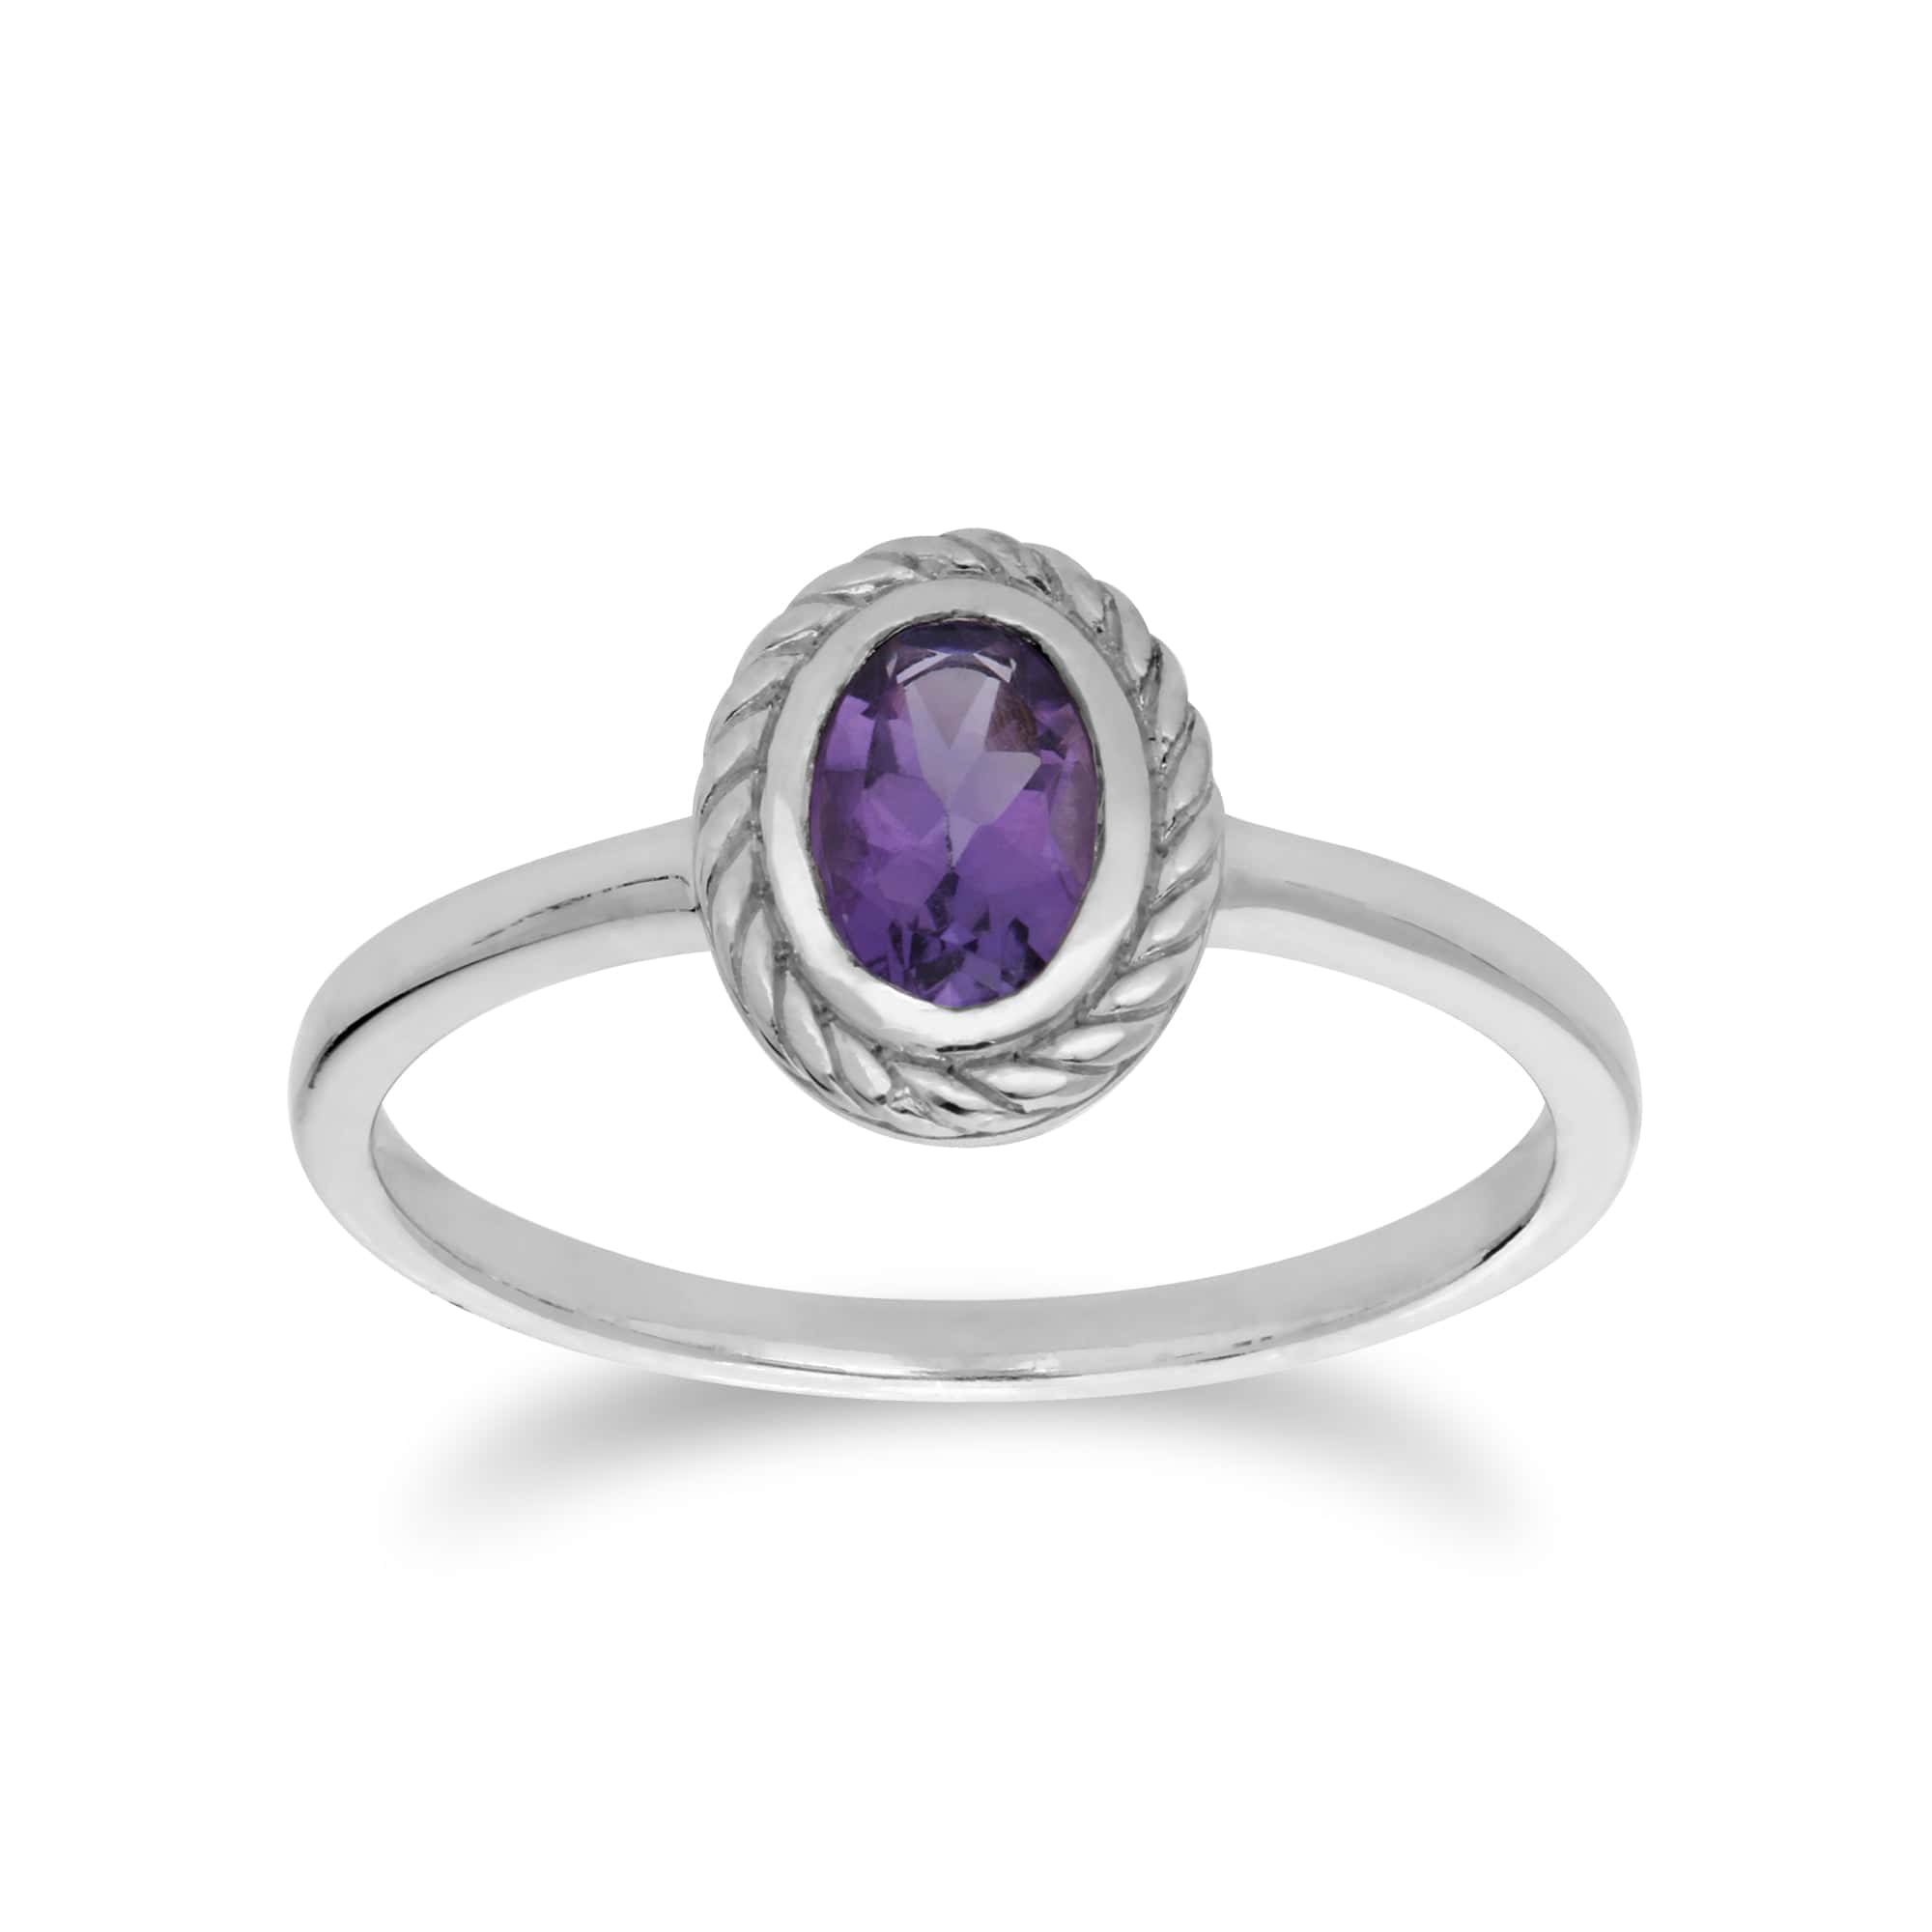 Classic Oval Amethyst Rope Design Ring in 925 Sterling Silver - Gemondo